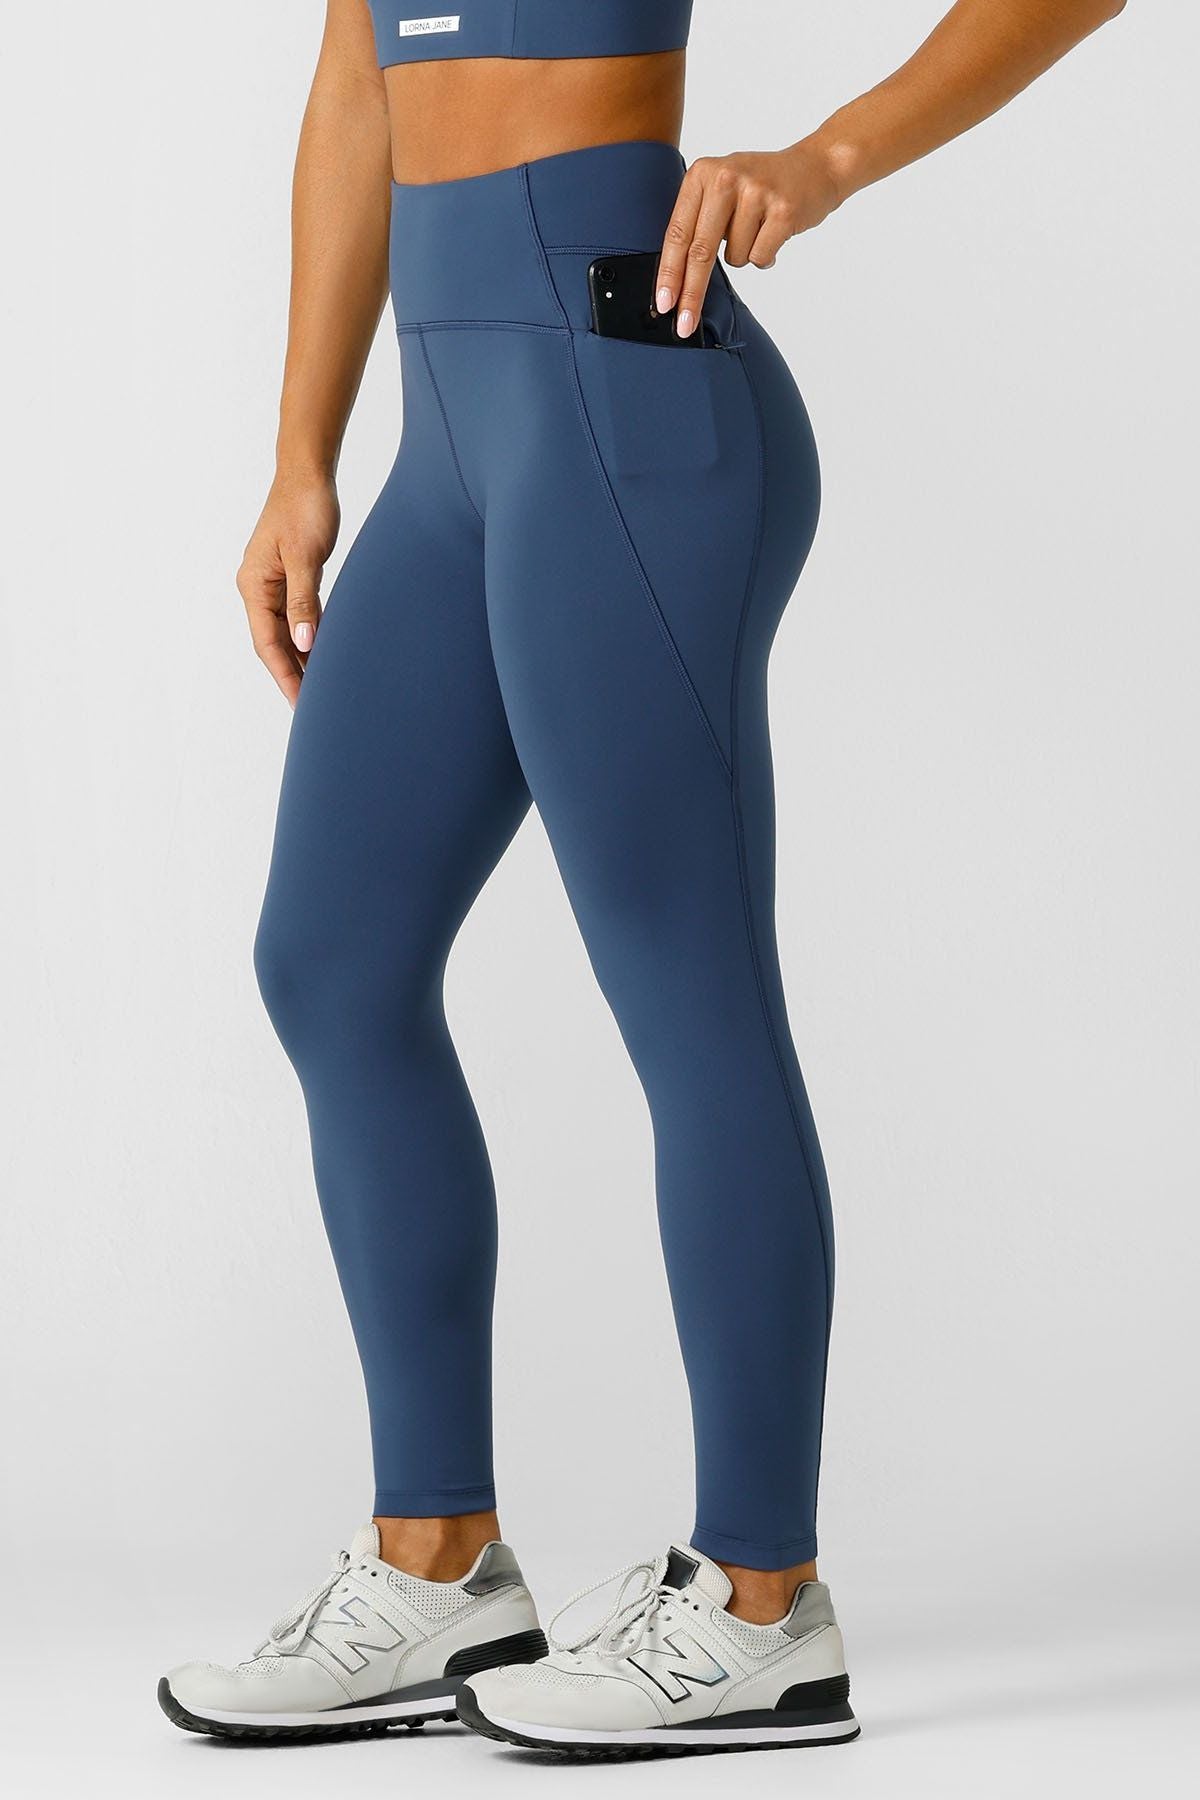 B.O.D By Finch Women's Tempo Tights / Leggings - Blue Mirage